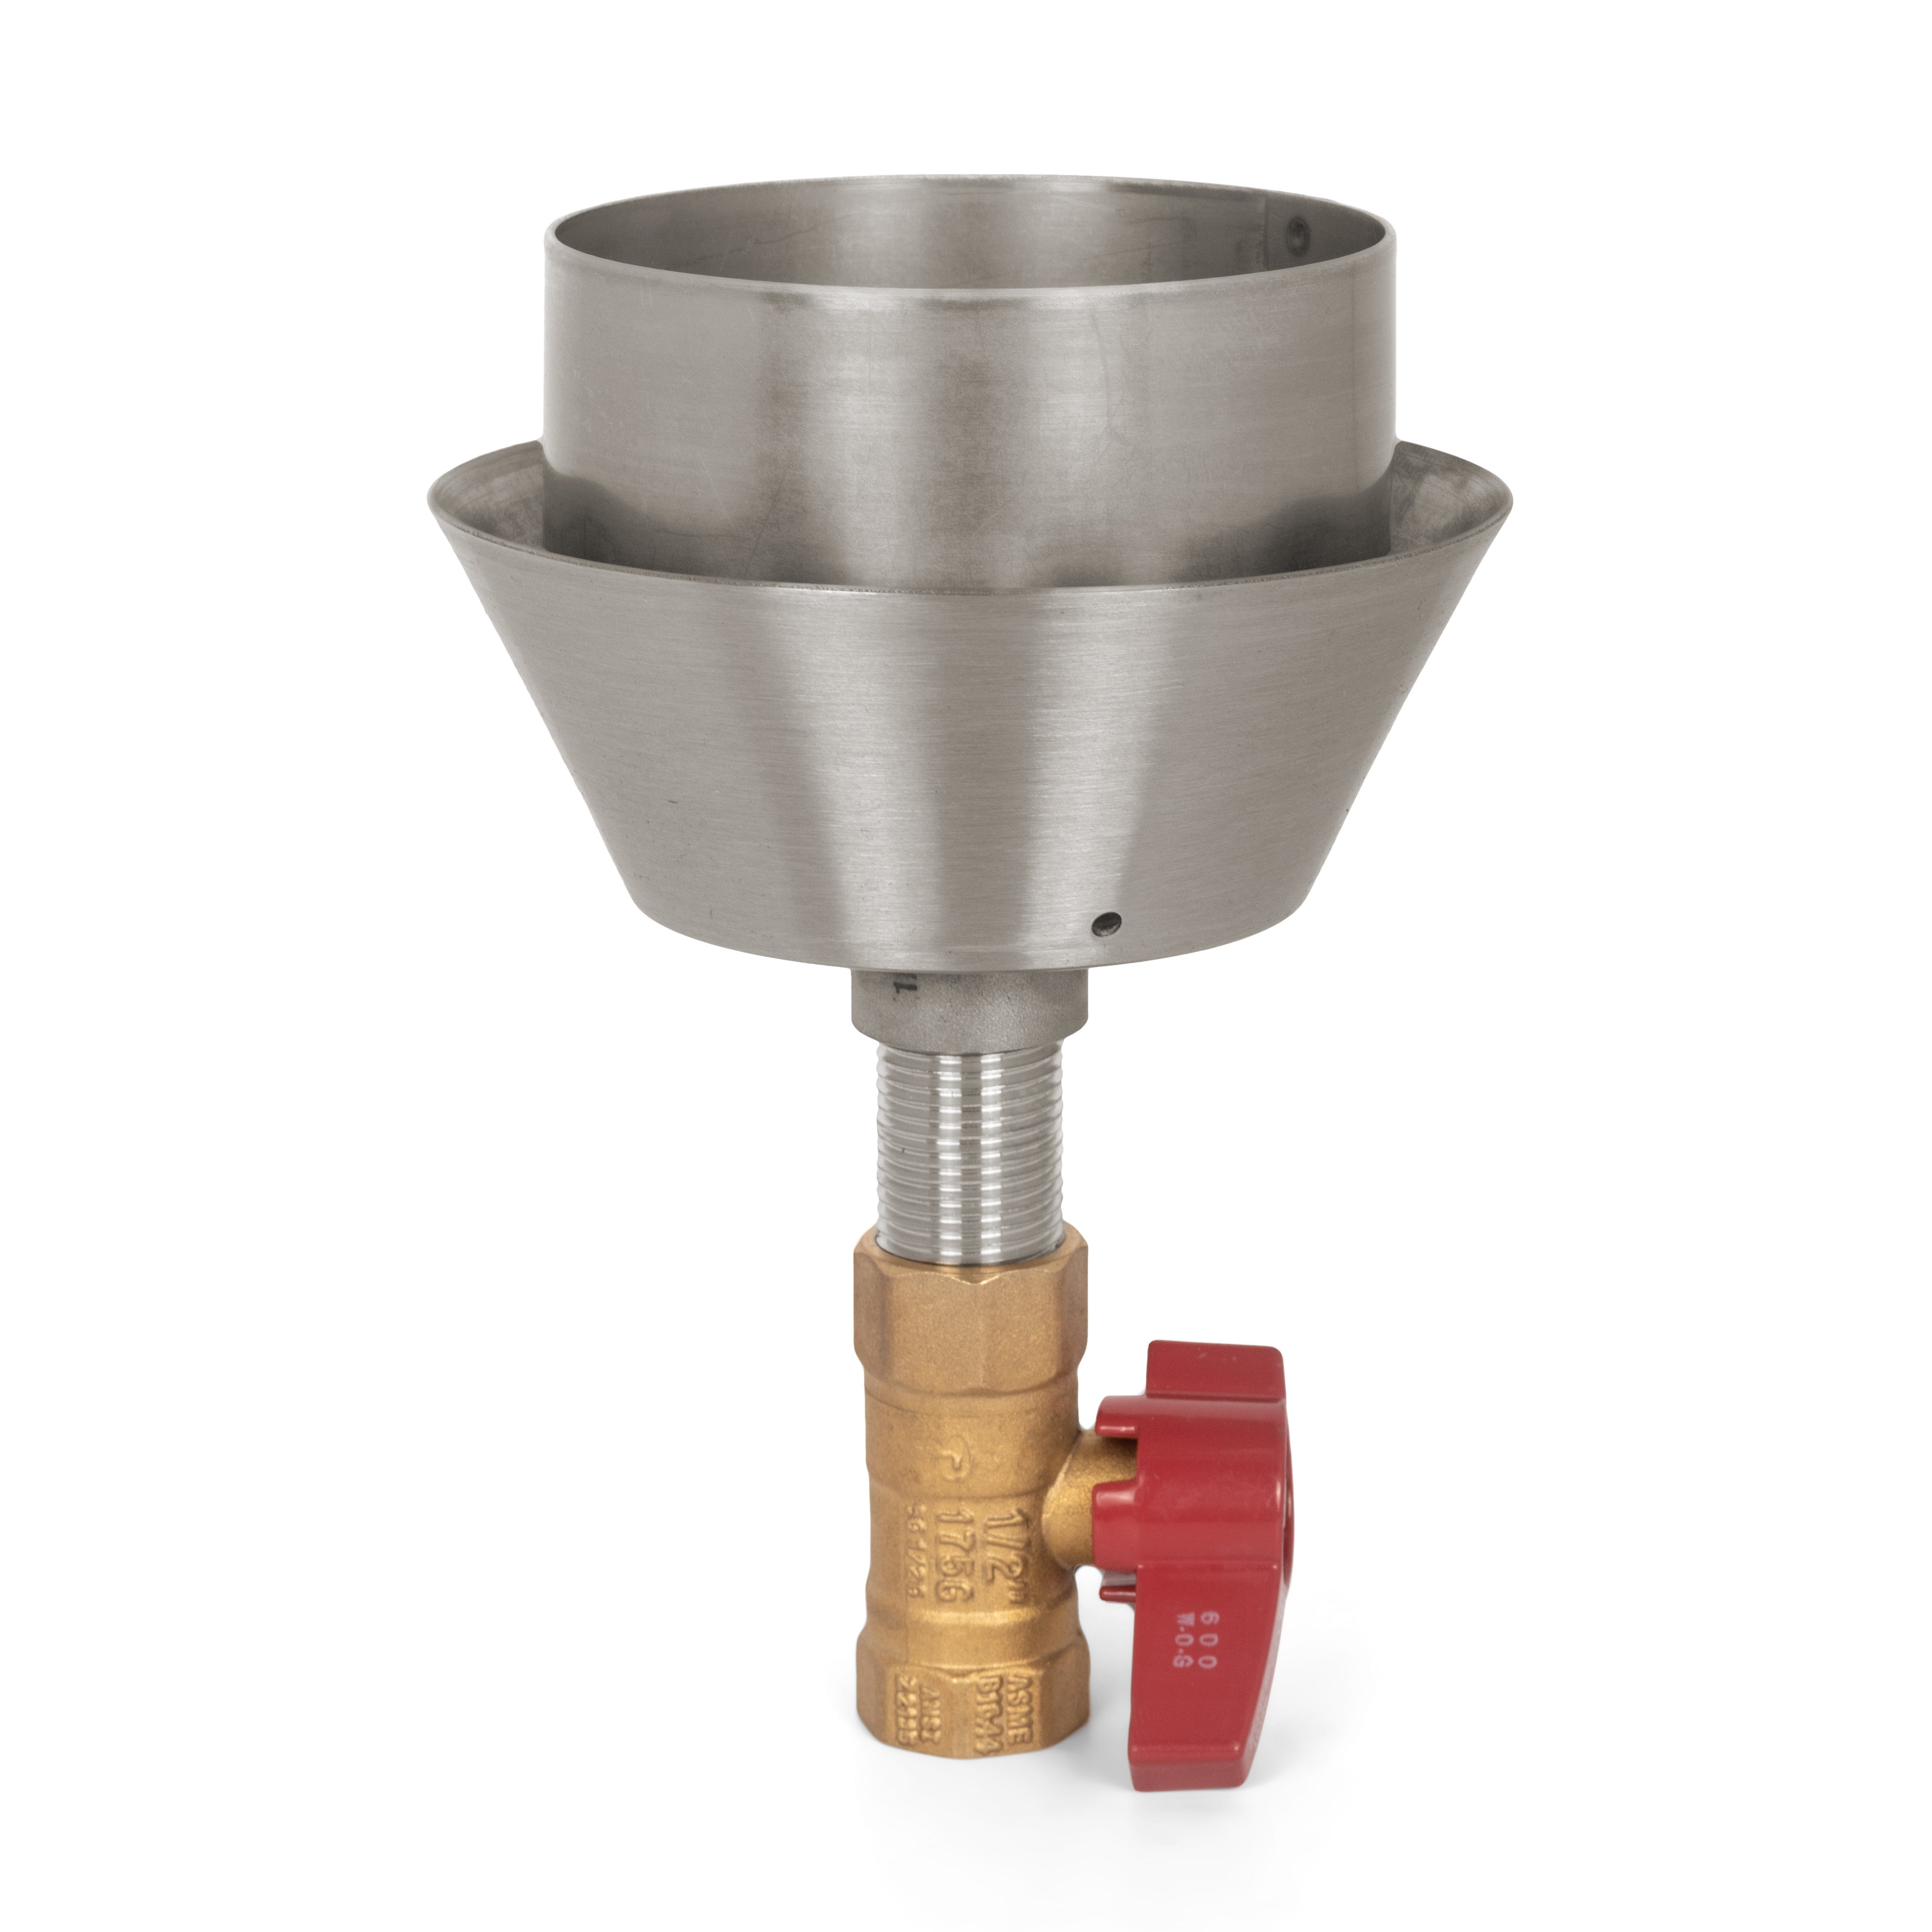 The Outdoor Plus Flower Torch with TOP Base -Stainless Steel- Manual Ball Valve